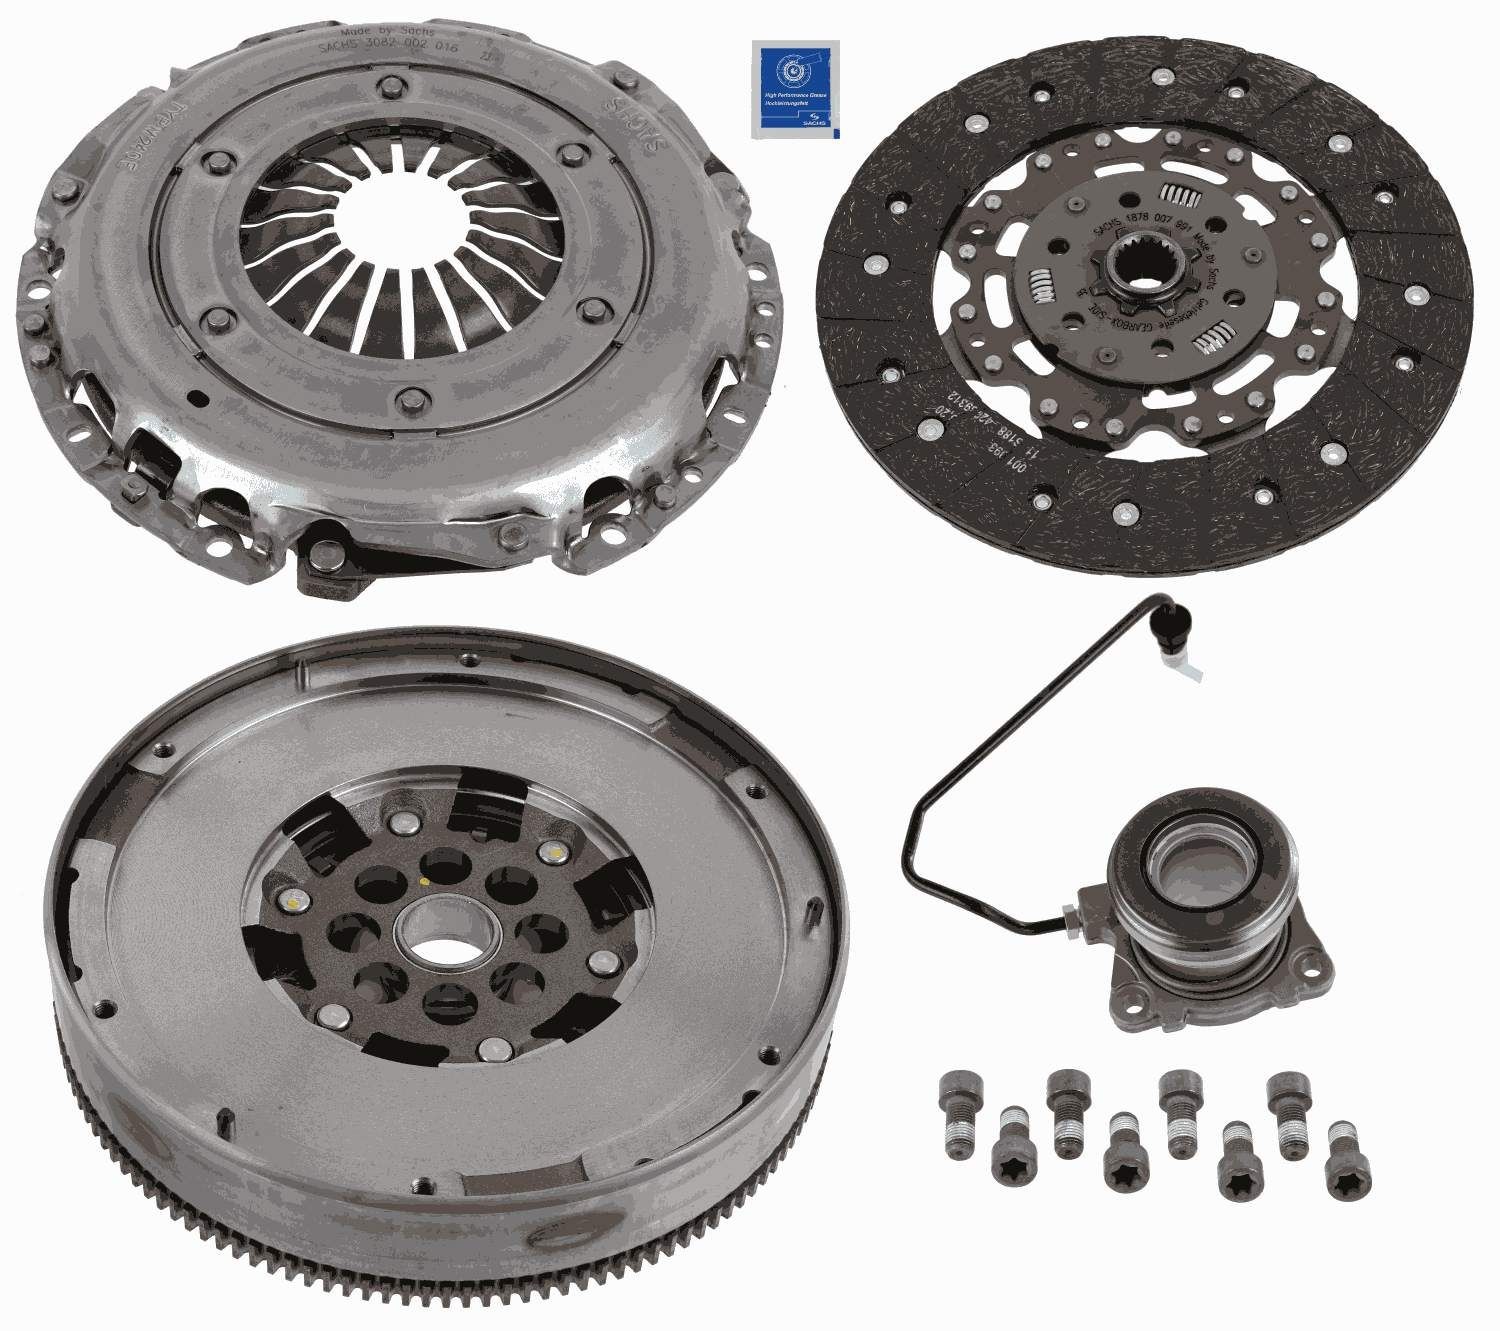 SACHS Clutch replacement kit OPEL Astra J GTC (P10) new 2290 601 142